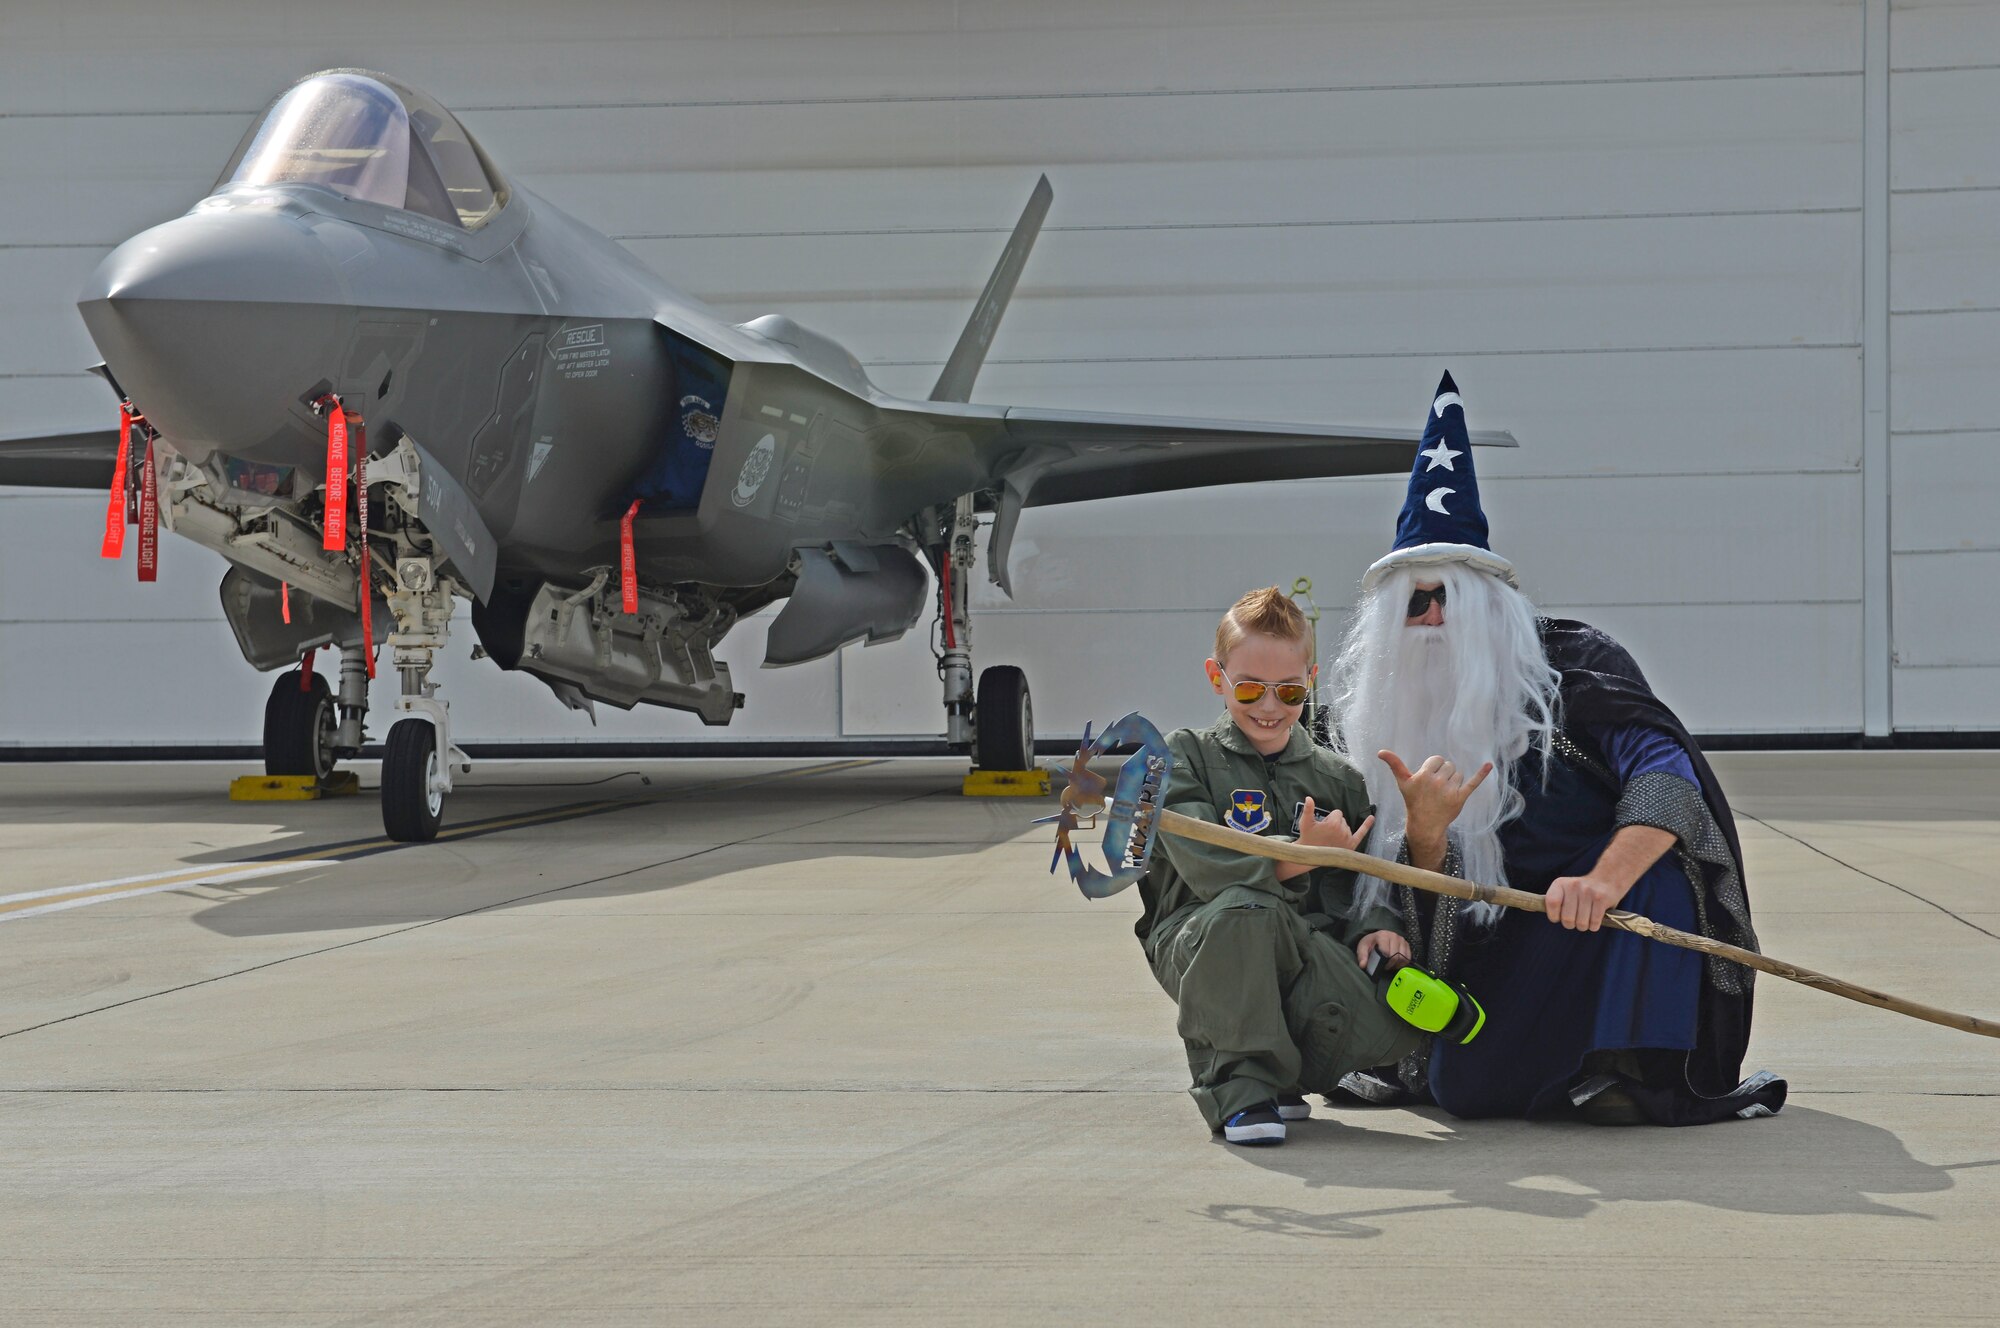 The 33rd Maintenance Squadron’s wizard mascot kneels in front of an F-35A Lightning II with Pilot for a Day, Christian Loafman, whose name was placed on the aircraft at Eglin Air Force Base, Fla., May 18, 2016. During his visit, Christian was greeted by military members dressed as superheroes who guided him through the maintenance portion of his tour. (U.S. Air Force photo/Senior Airman Andrea Posey)